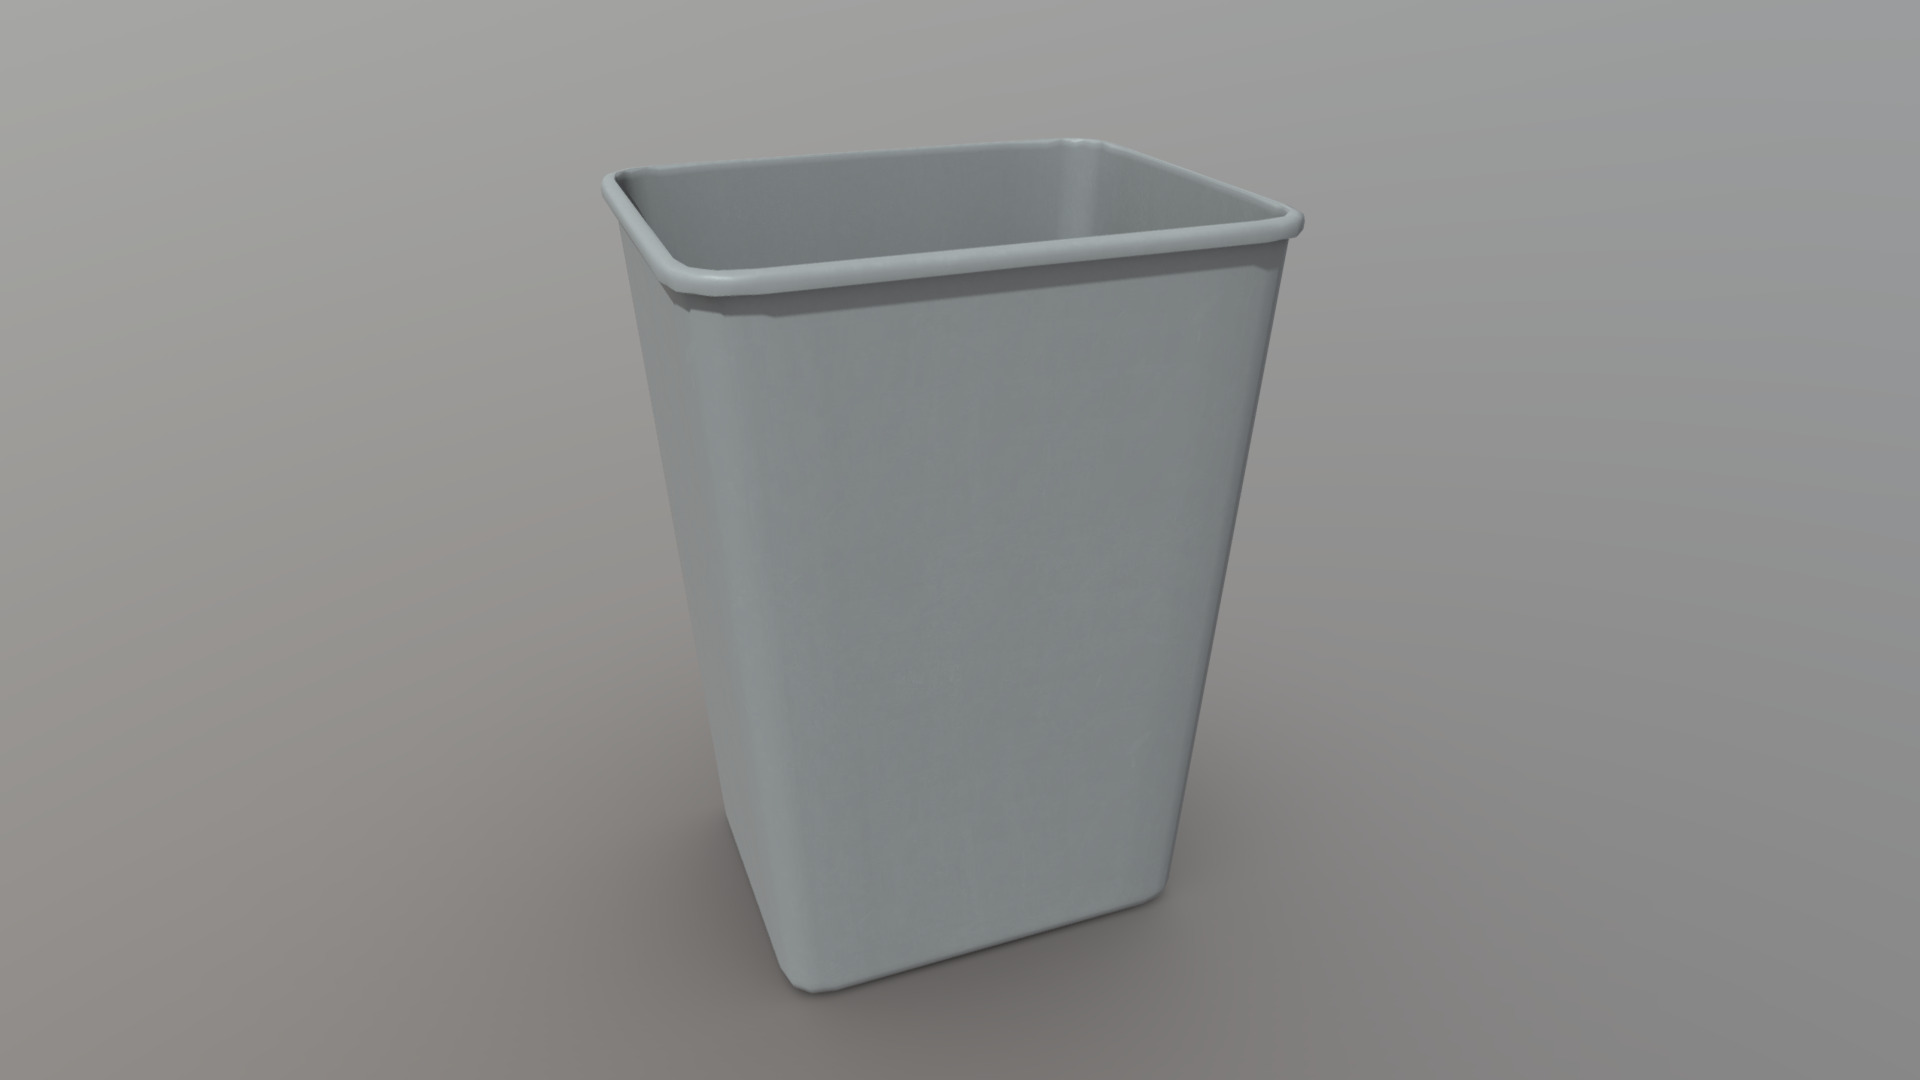 3D model Recycling Bin - This is a 3D model of the Recycling Bin. The 3D model is about a white square container.